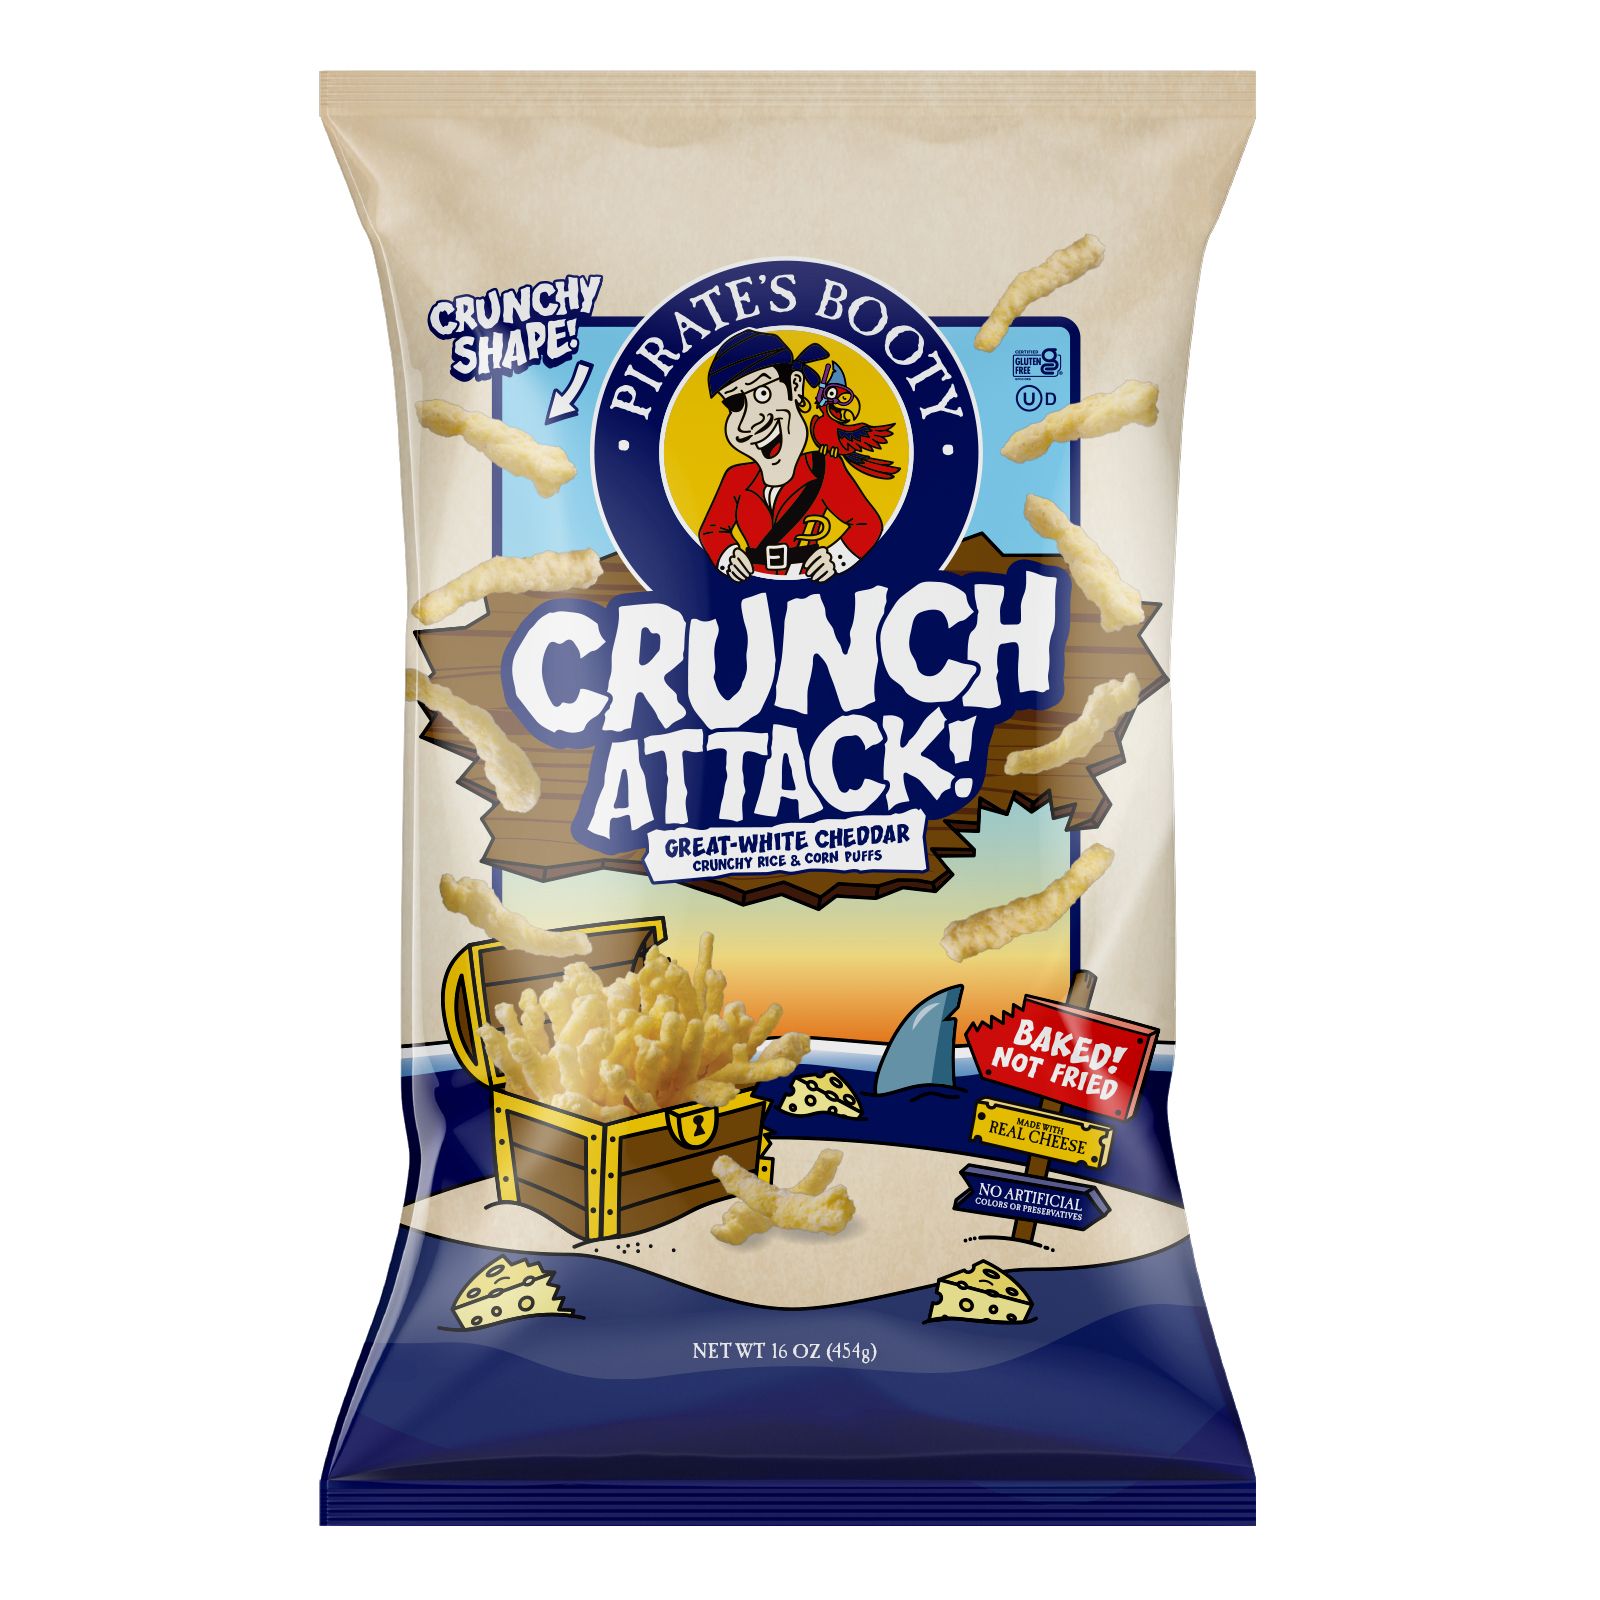 Pirate's Booty Crunch Attack Great-White Cheddar Snacks, 16 oz.